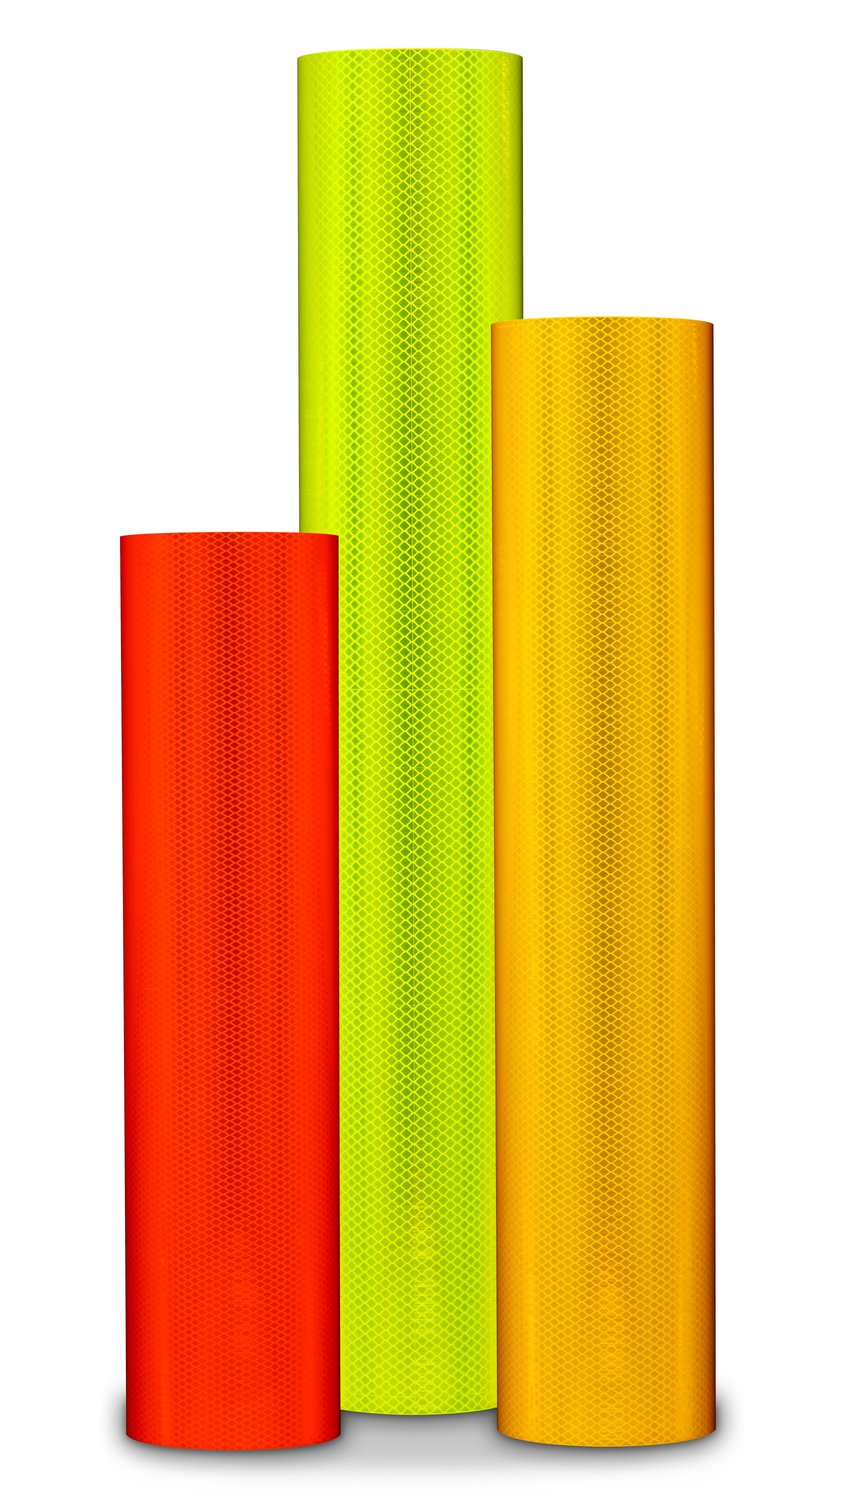 7100152909 - 3M Diamond Grade DG³ Reflective Sheeting 4081, Fluorescent Yellow,
with Lead/Trailer, 8.9687 in x 50 yd